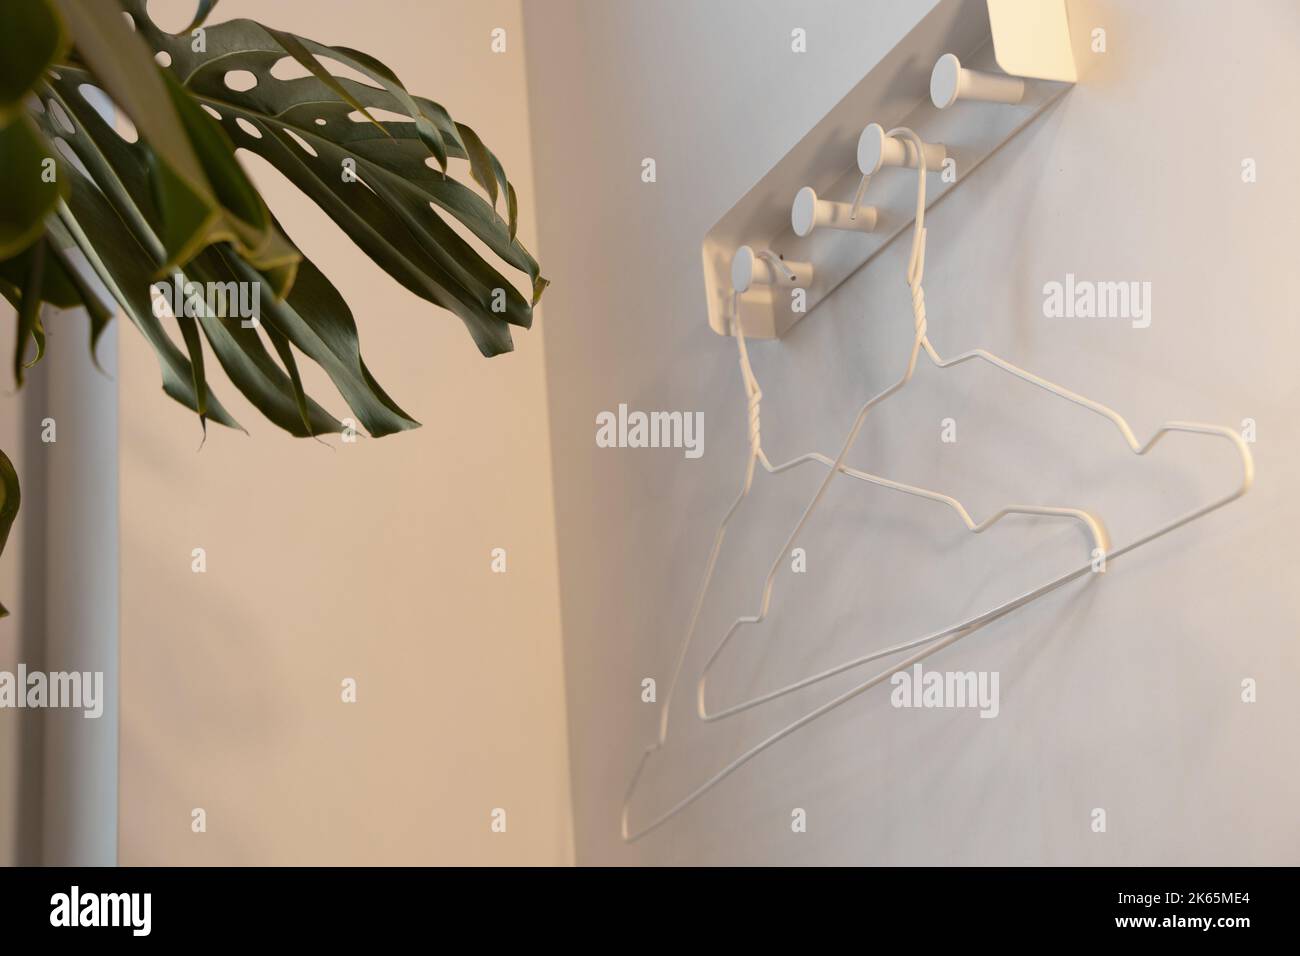 white hangers hang on the wall on hooks near a green indoor flower in an apartment, interior, hangers without clothes Stock Photo